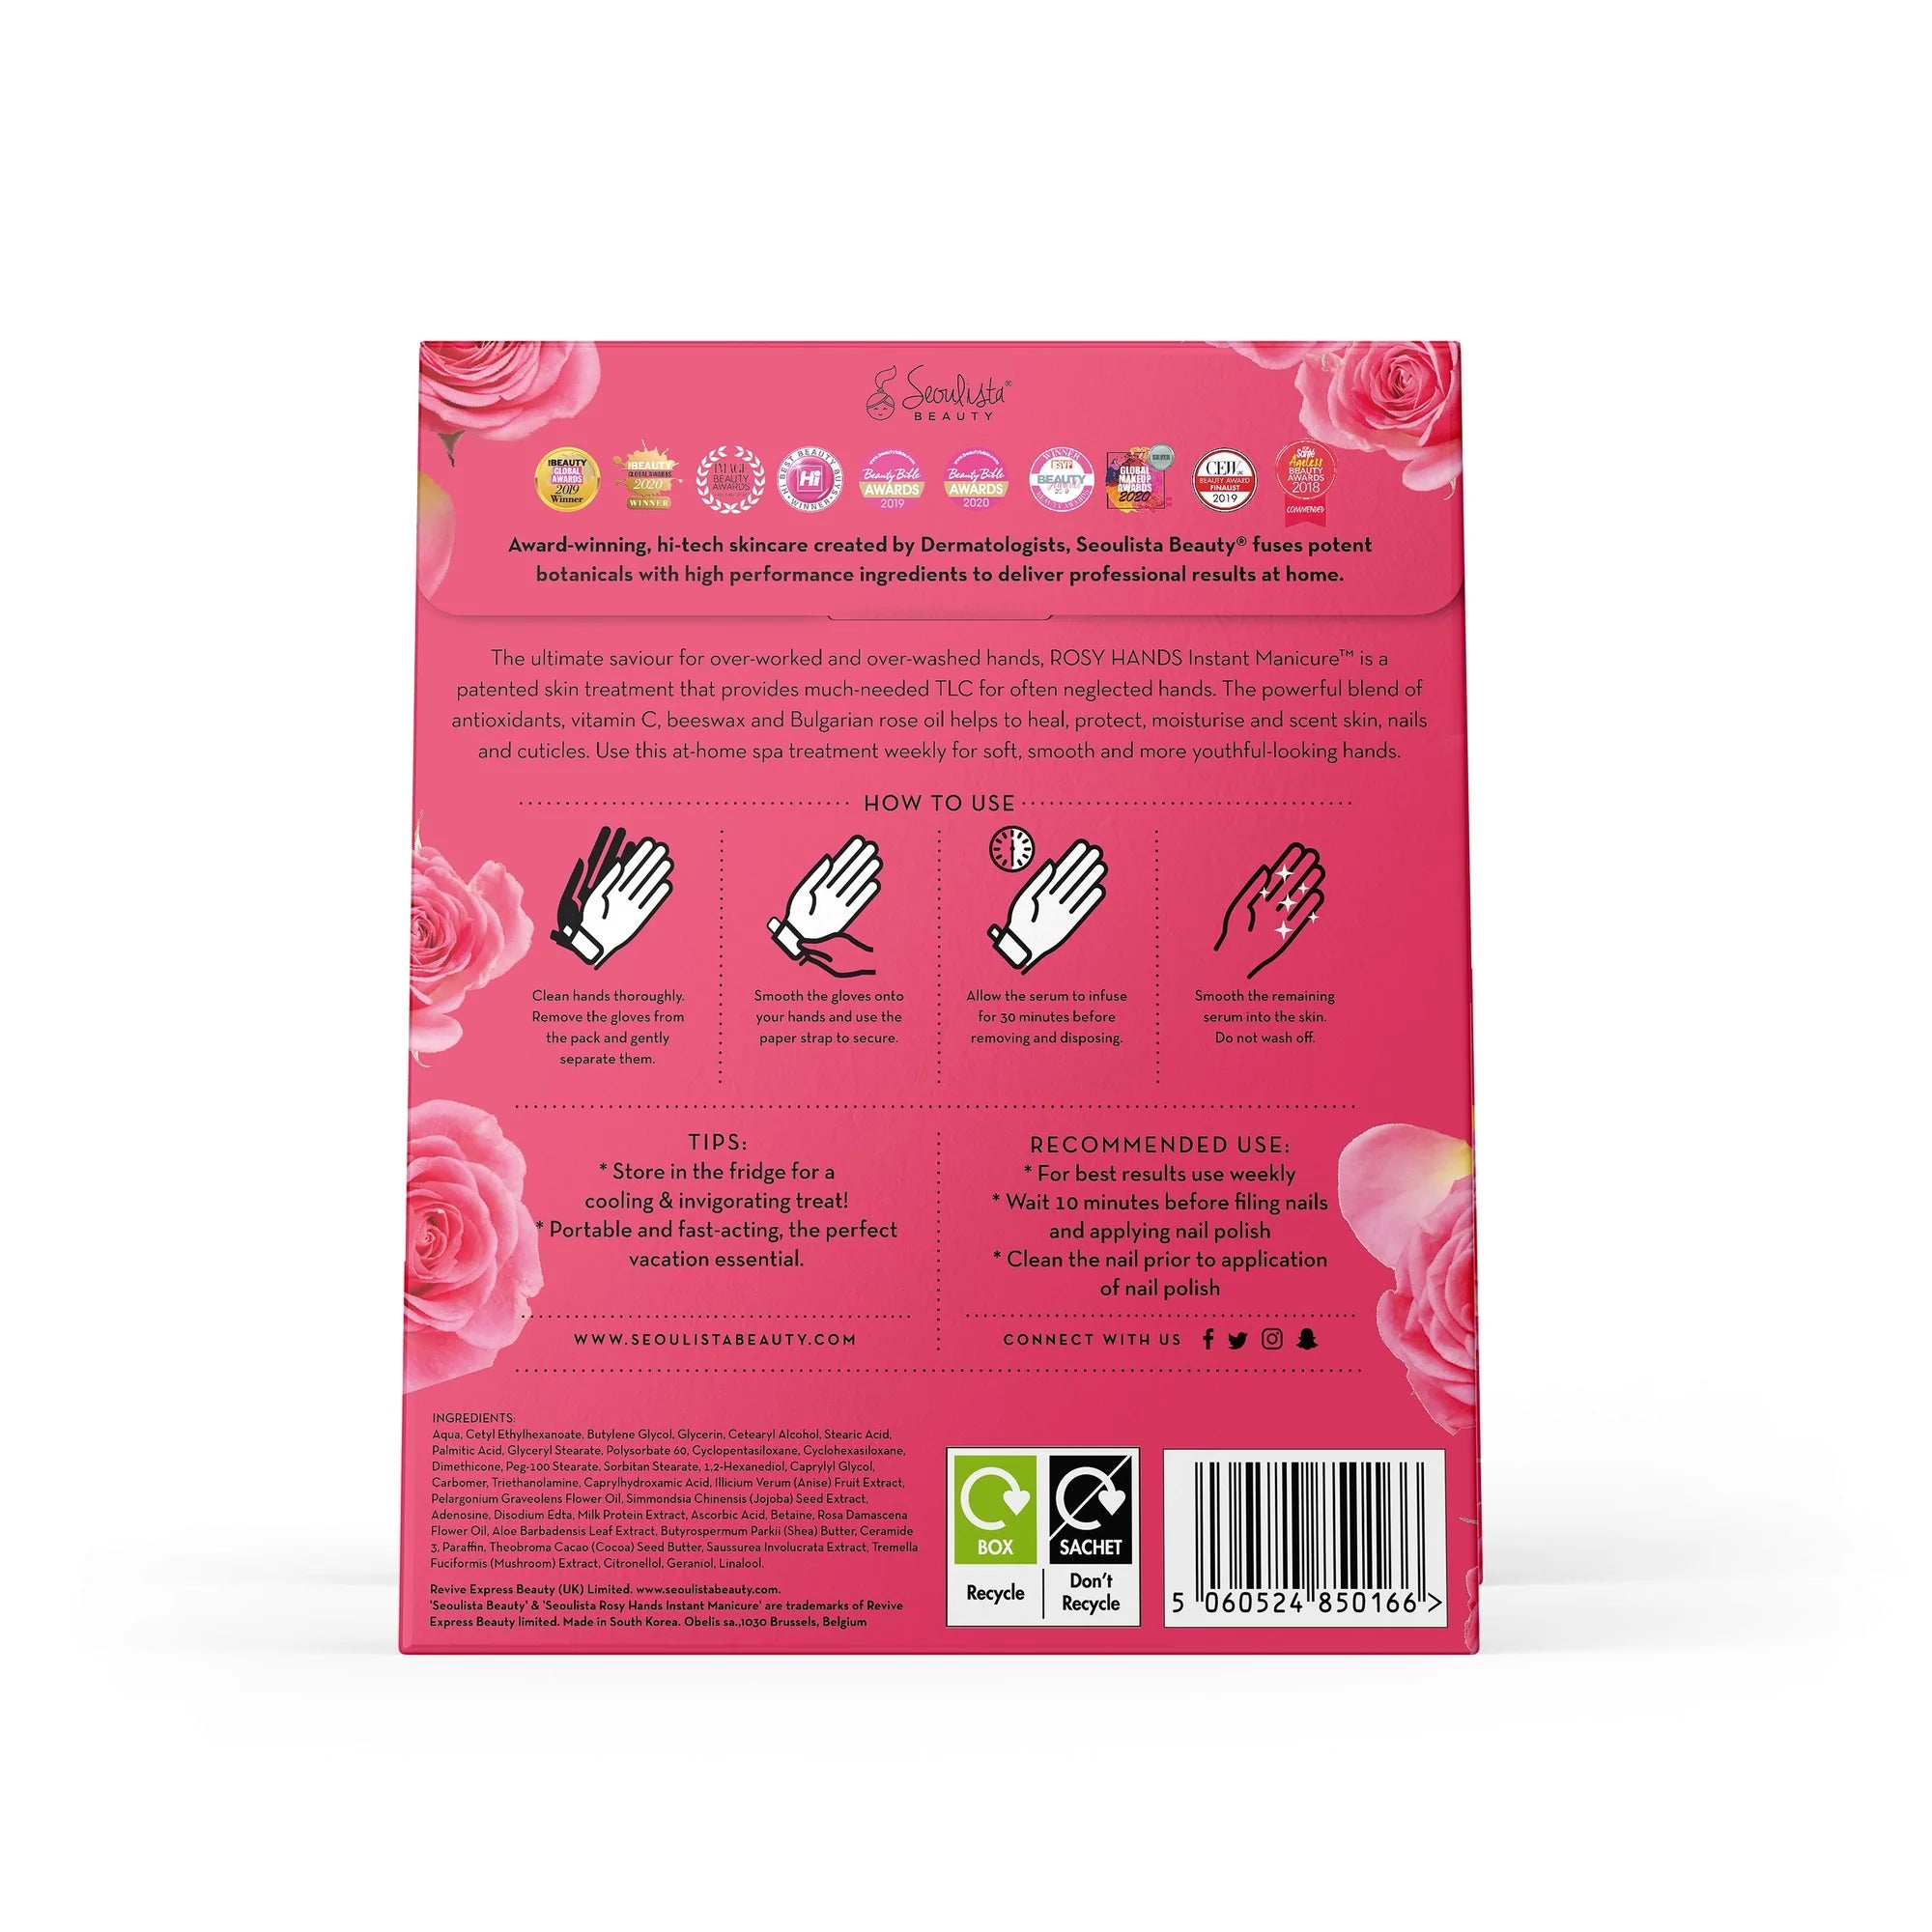 Seoulista Rosy Hands Instant Manicure Hand Treatment Mask How To use